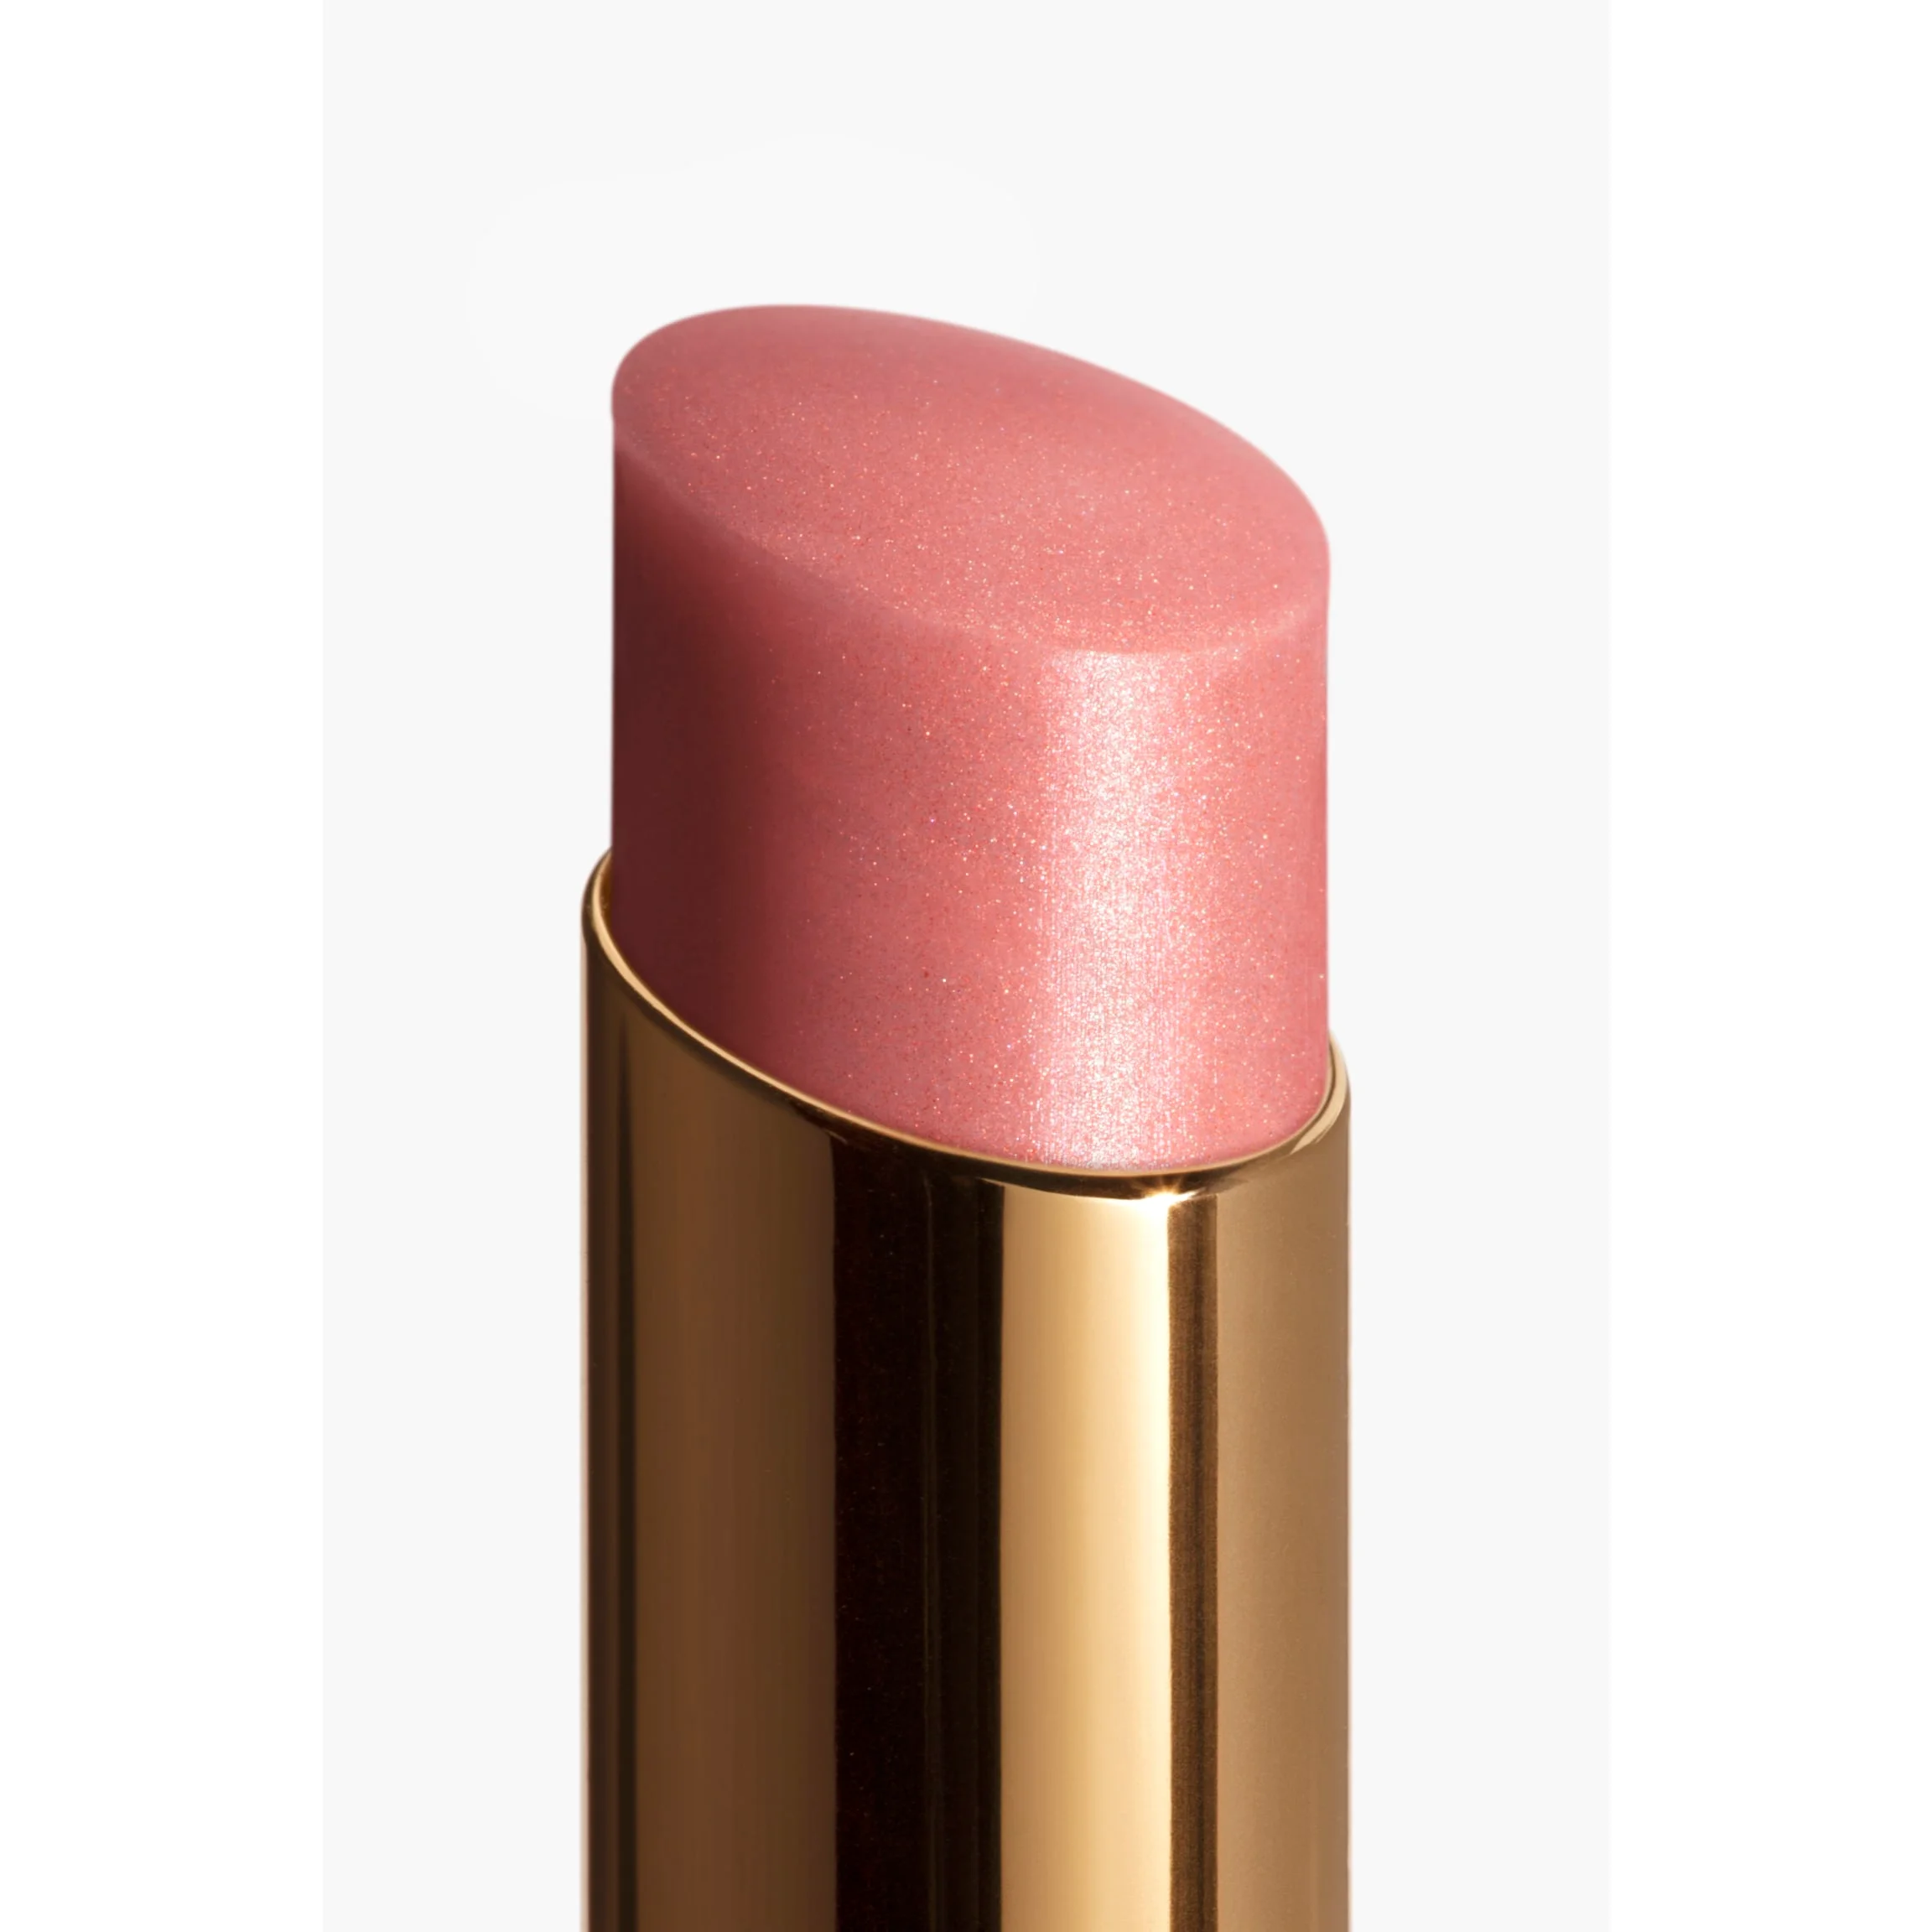 Chanel + ROUGE COCO BAUME Hydrating Beautifying Tinted Lip Balm